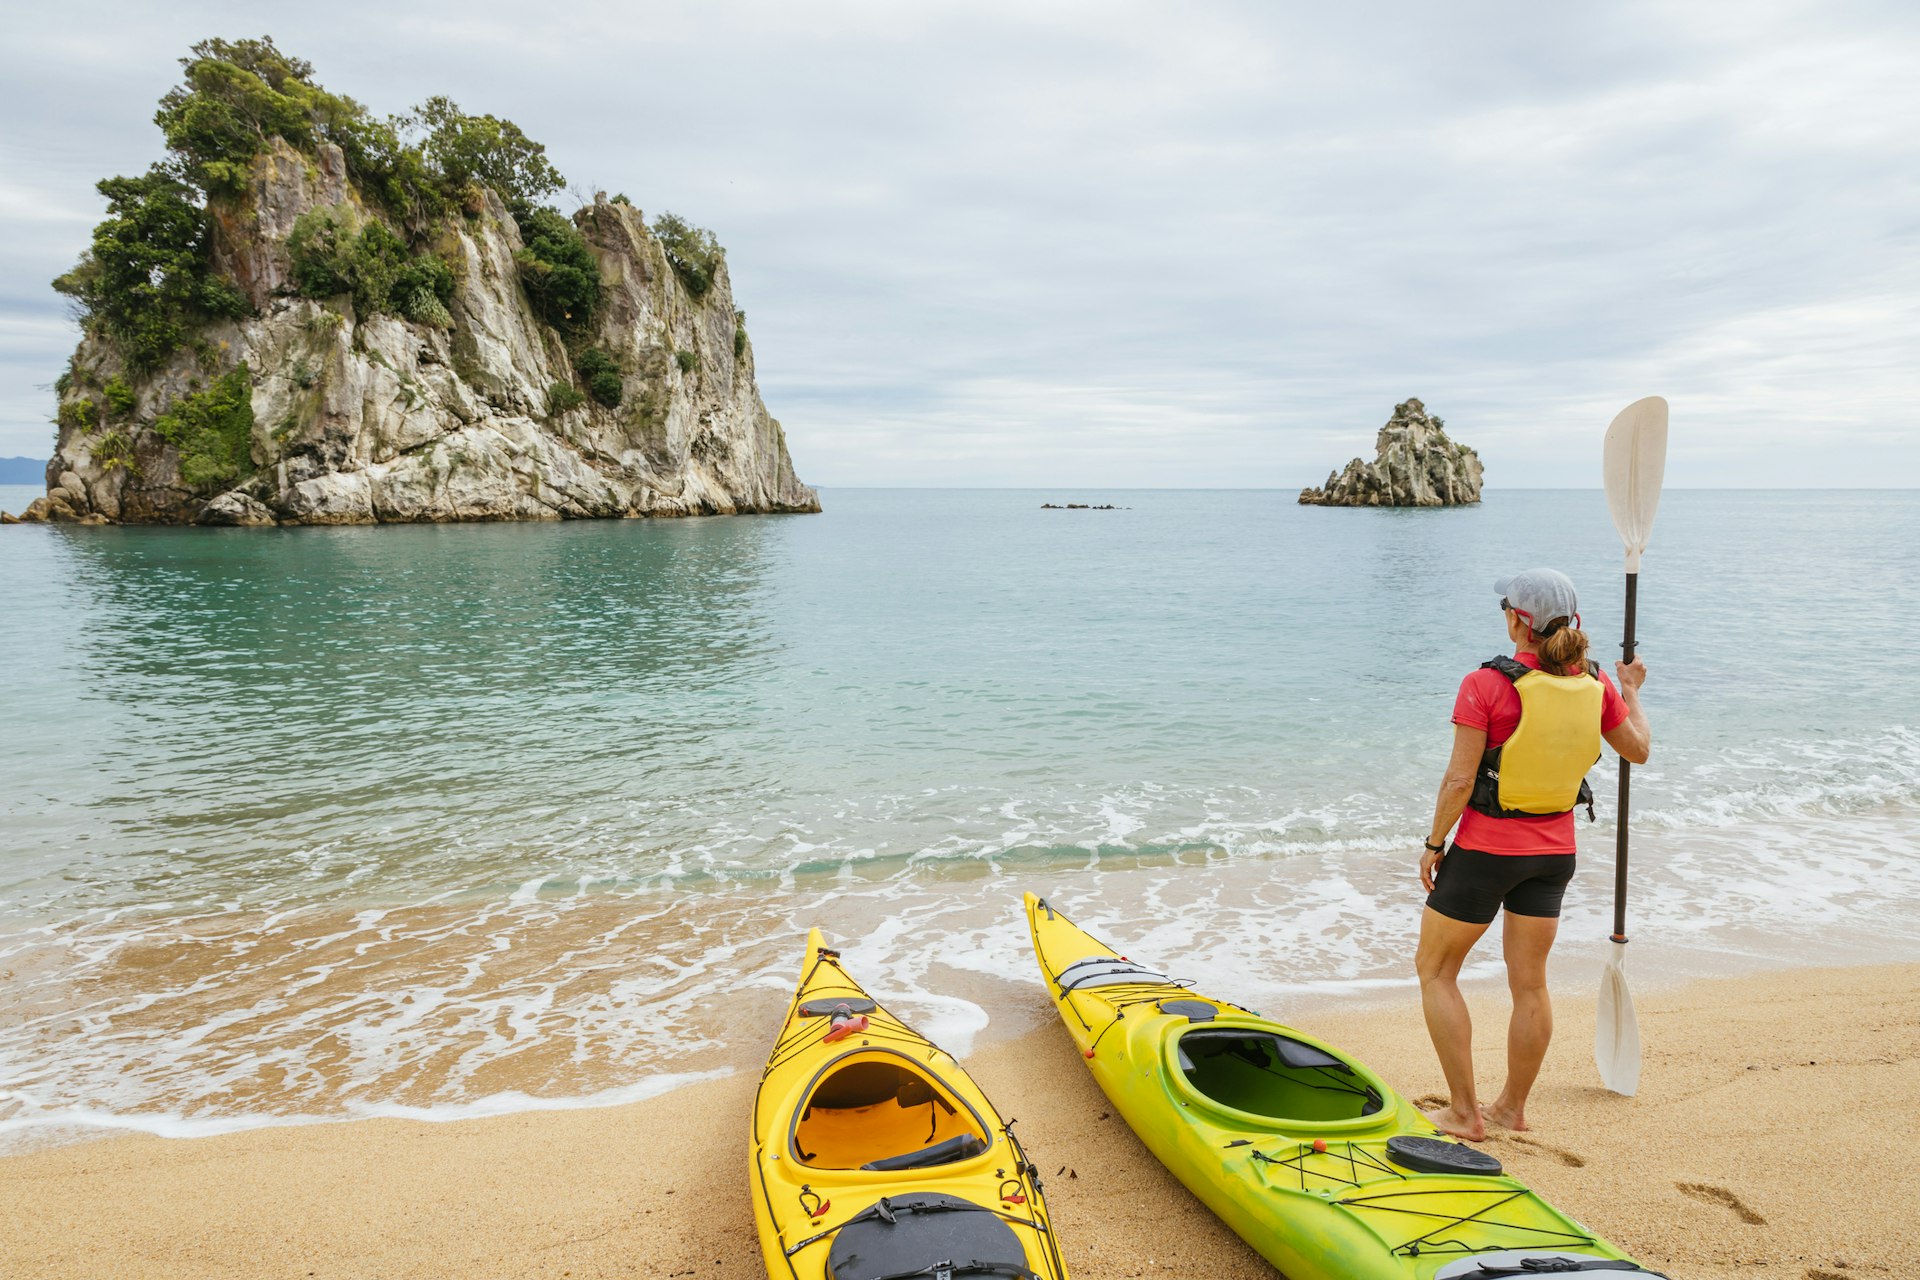 A woman stands by a yellow kayak looking out to a rocky outcrop in the sea